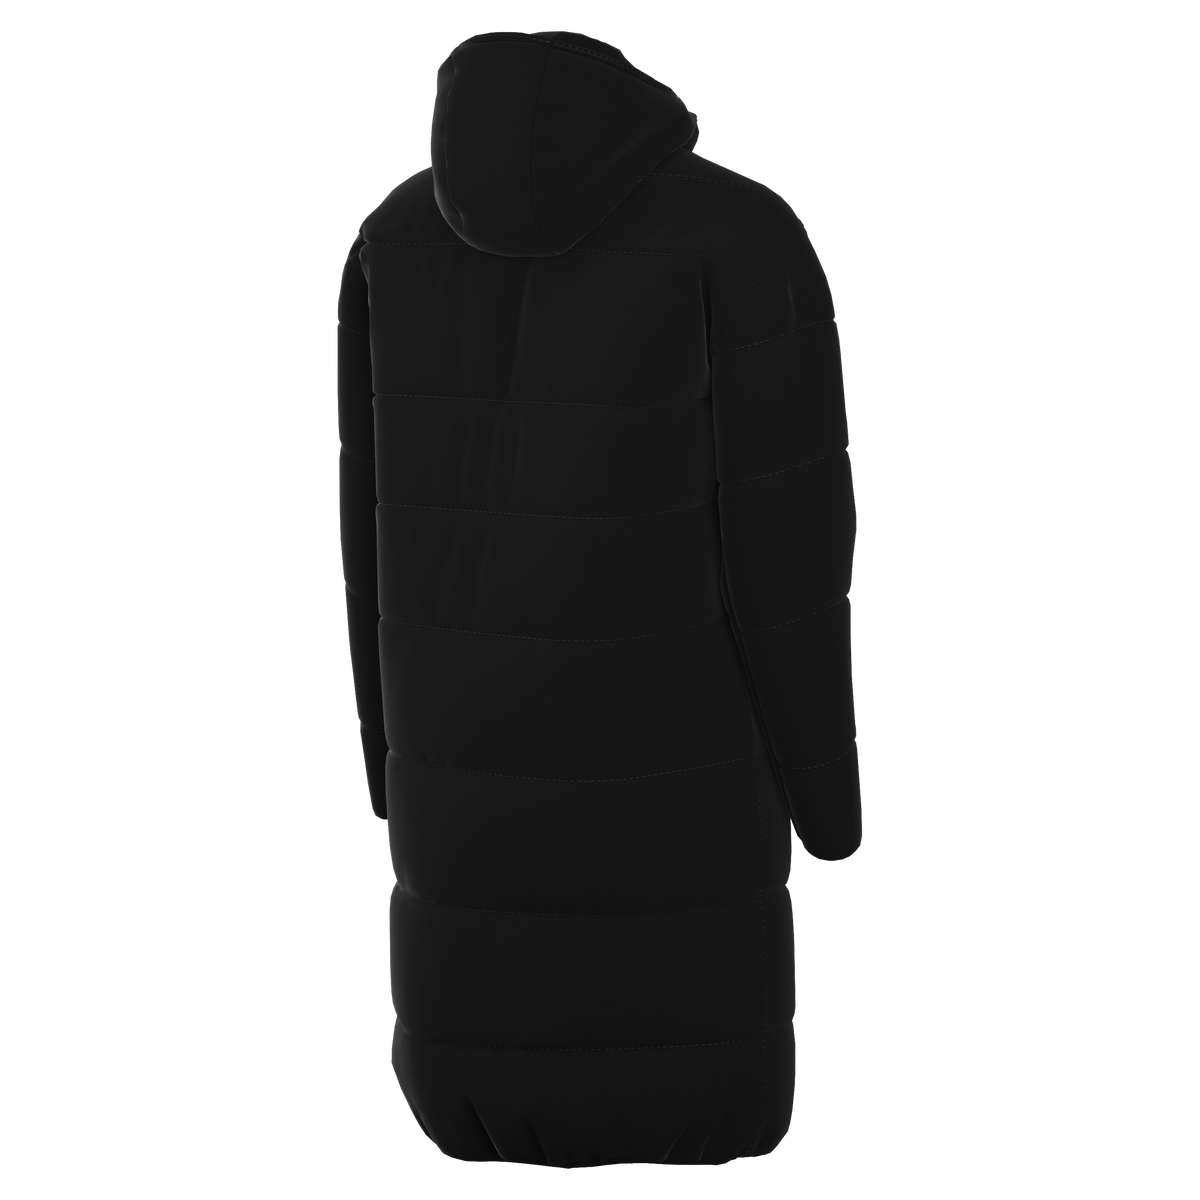 Women's Nike Therma-FIT Academy Pro 24 Down Jacket